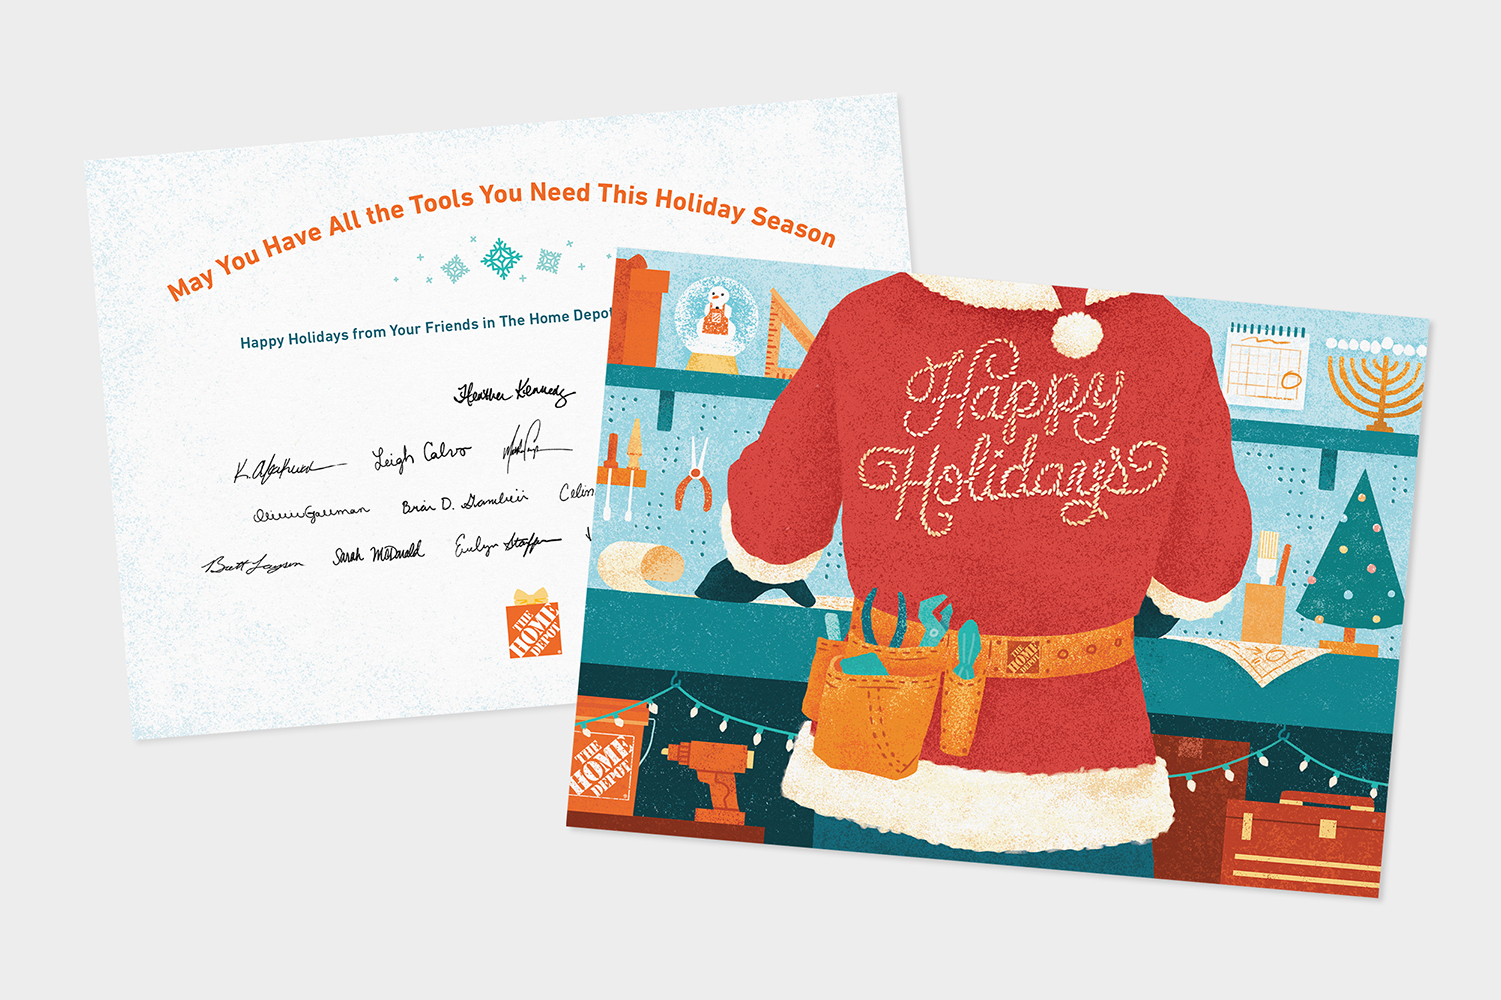 A holiday card featuring a red Santa suit with "Happy Holidays" written on it in glitter. The background displays various workshop tools. The top of the card reads, "May You Have All the Tools You Need This Holiday Season," with signatures below.